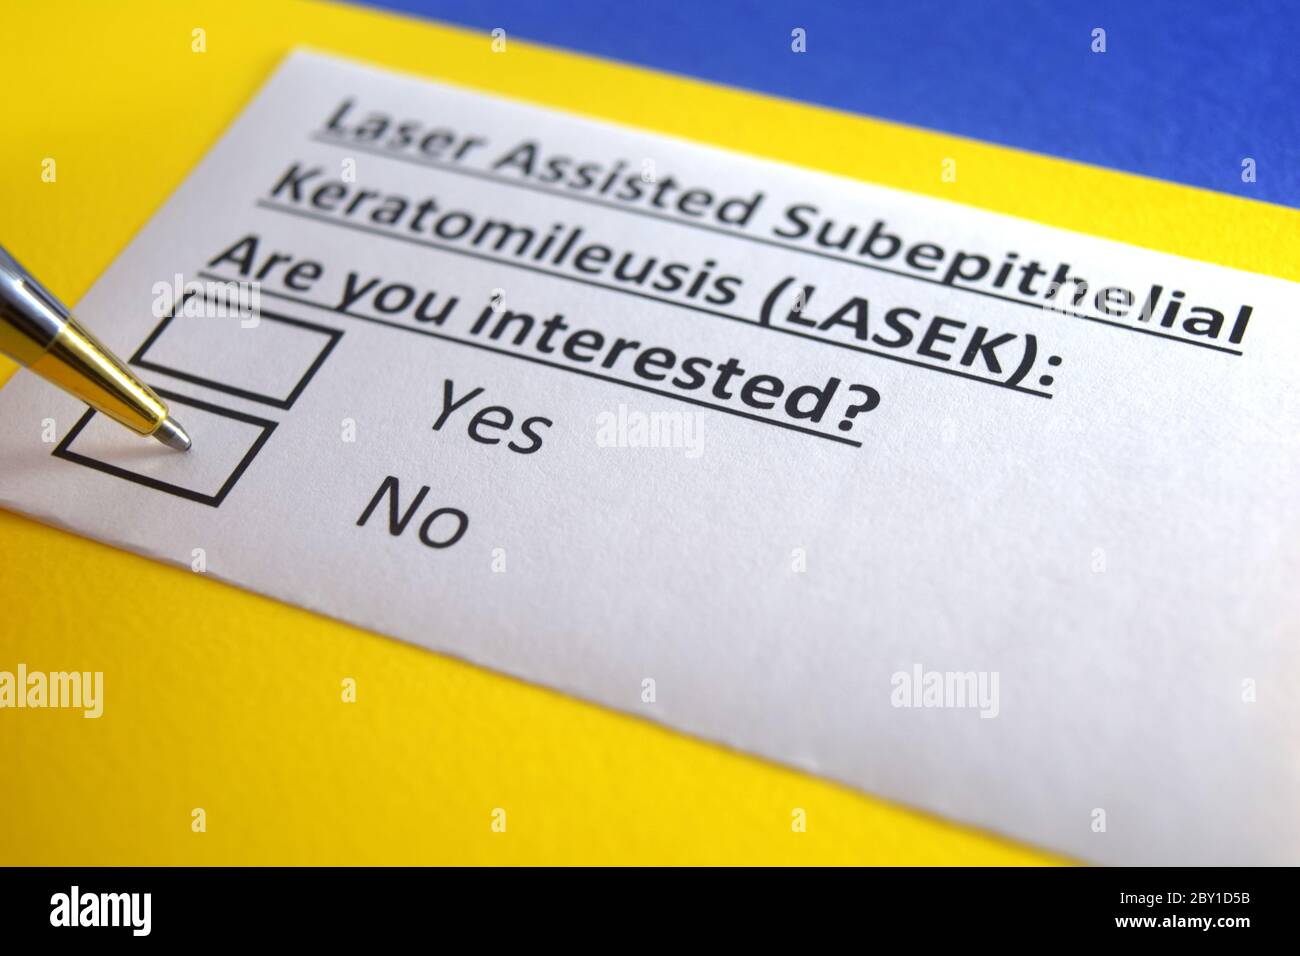 One person is answering question about laser assisted subepithelial keratomileusis (LASEK). Stock Photo